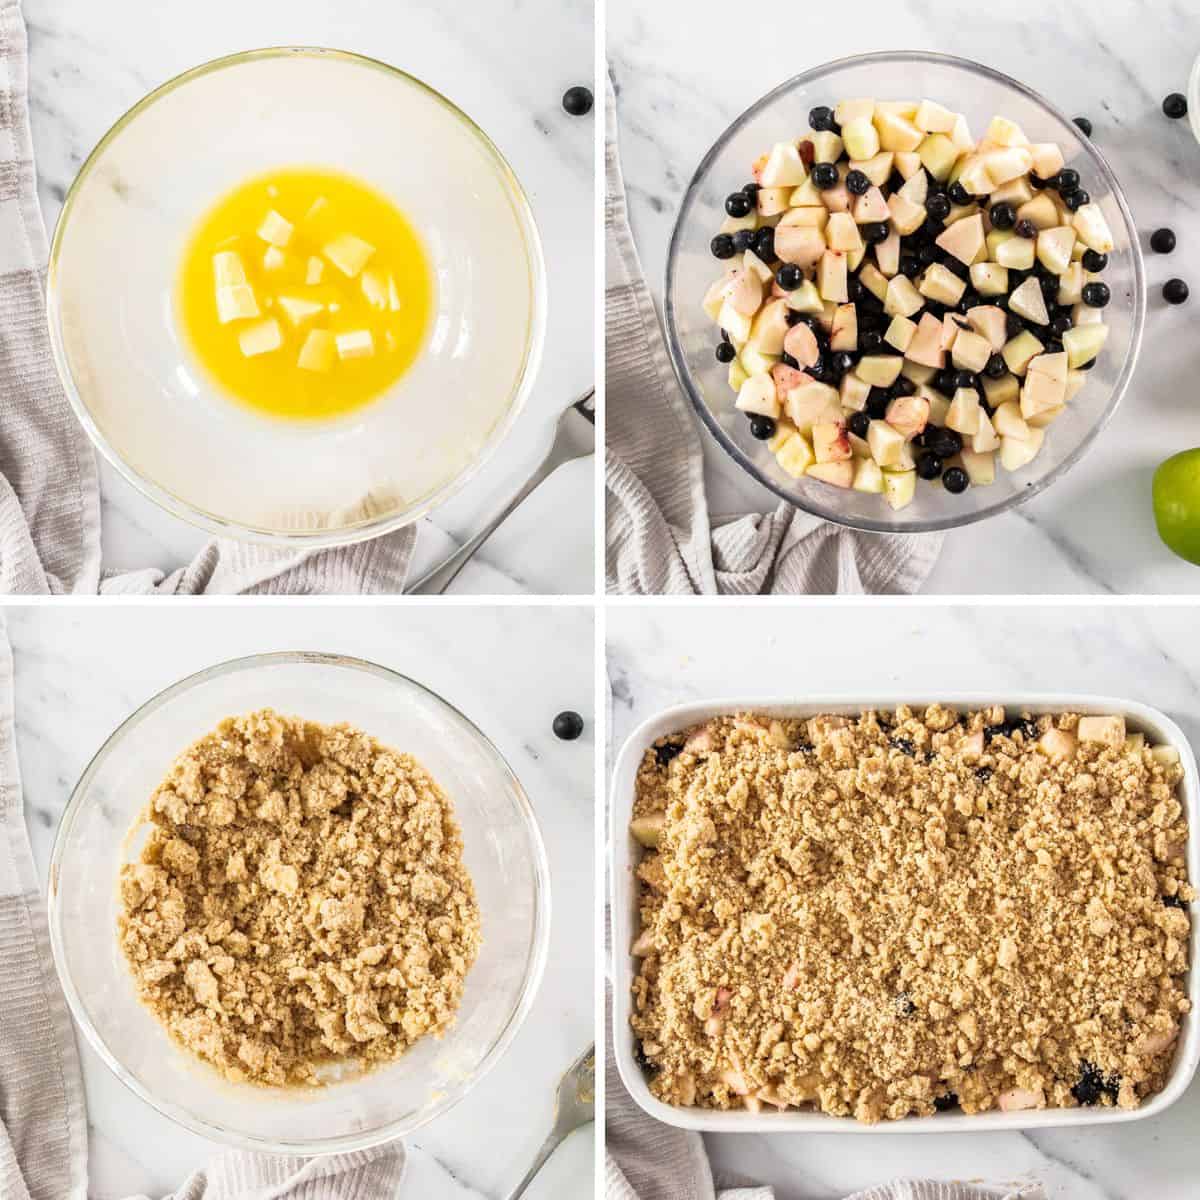 4 photos showing the process of making a fruit crisp.